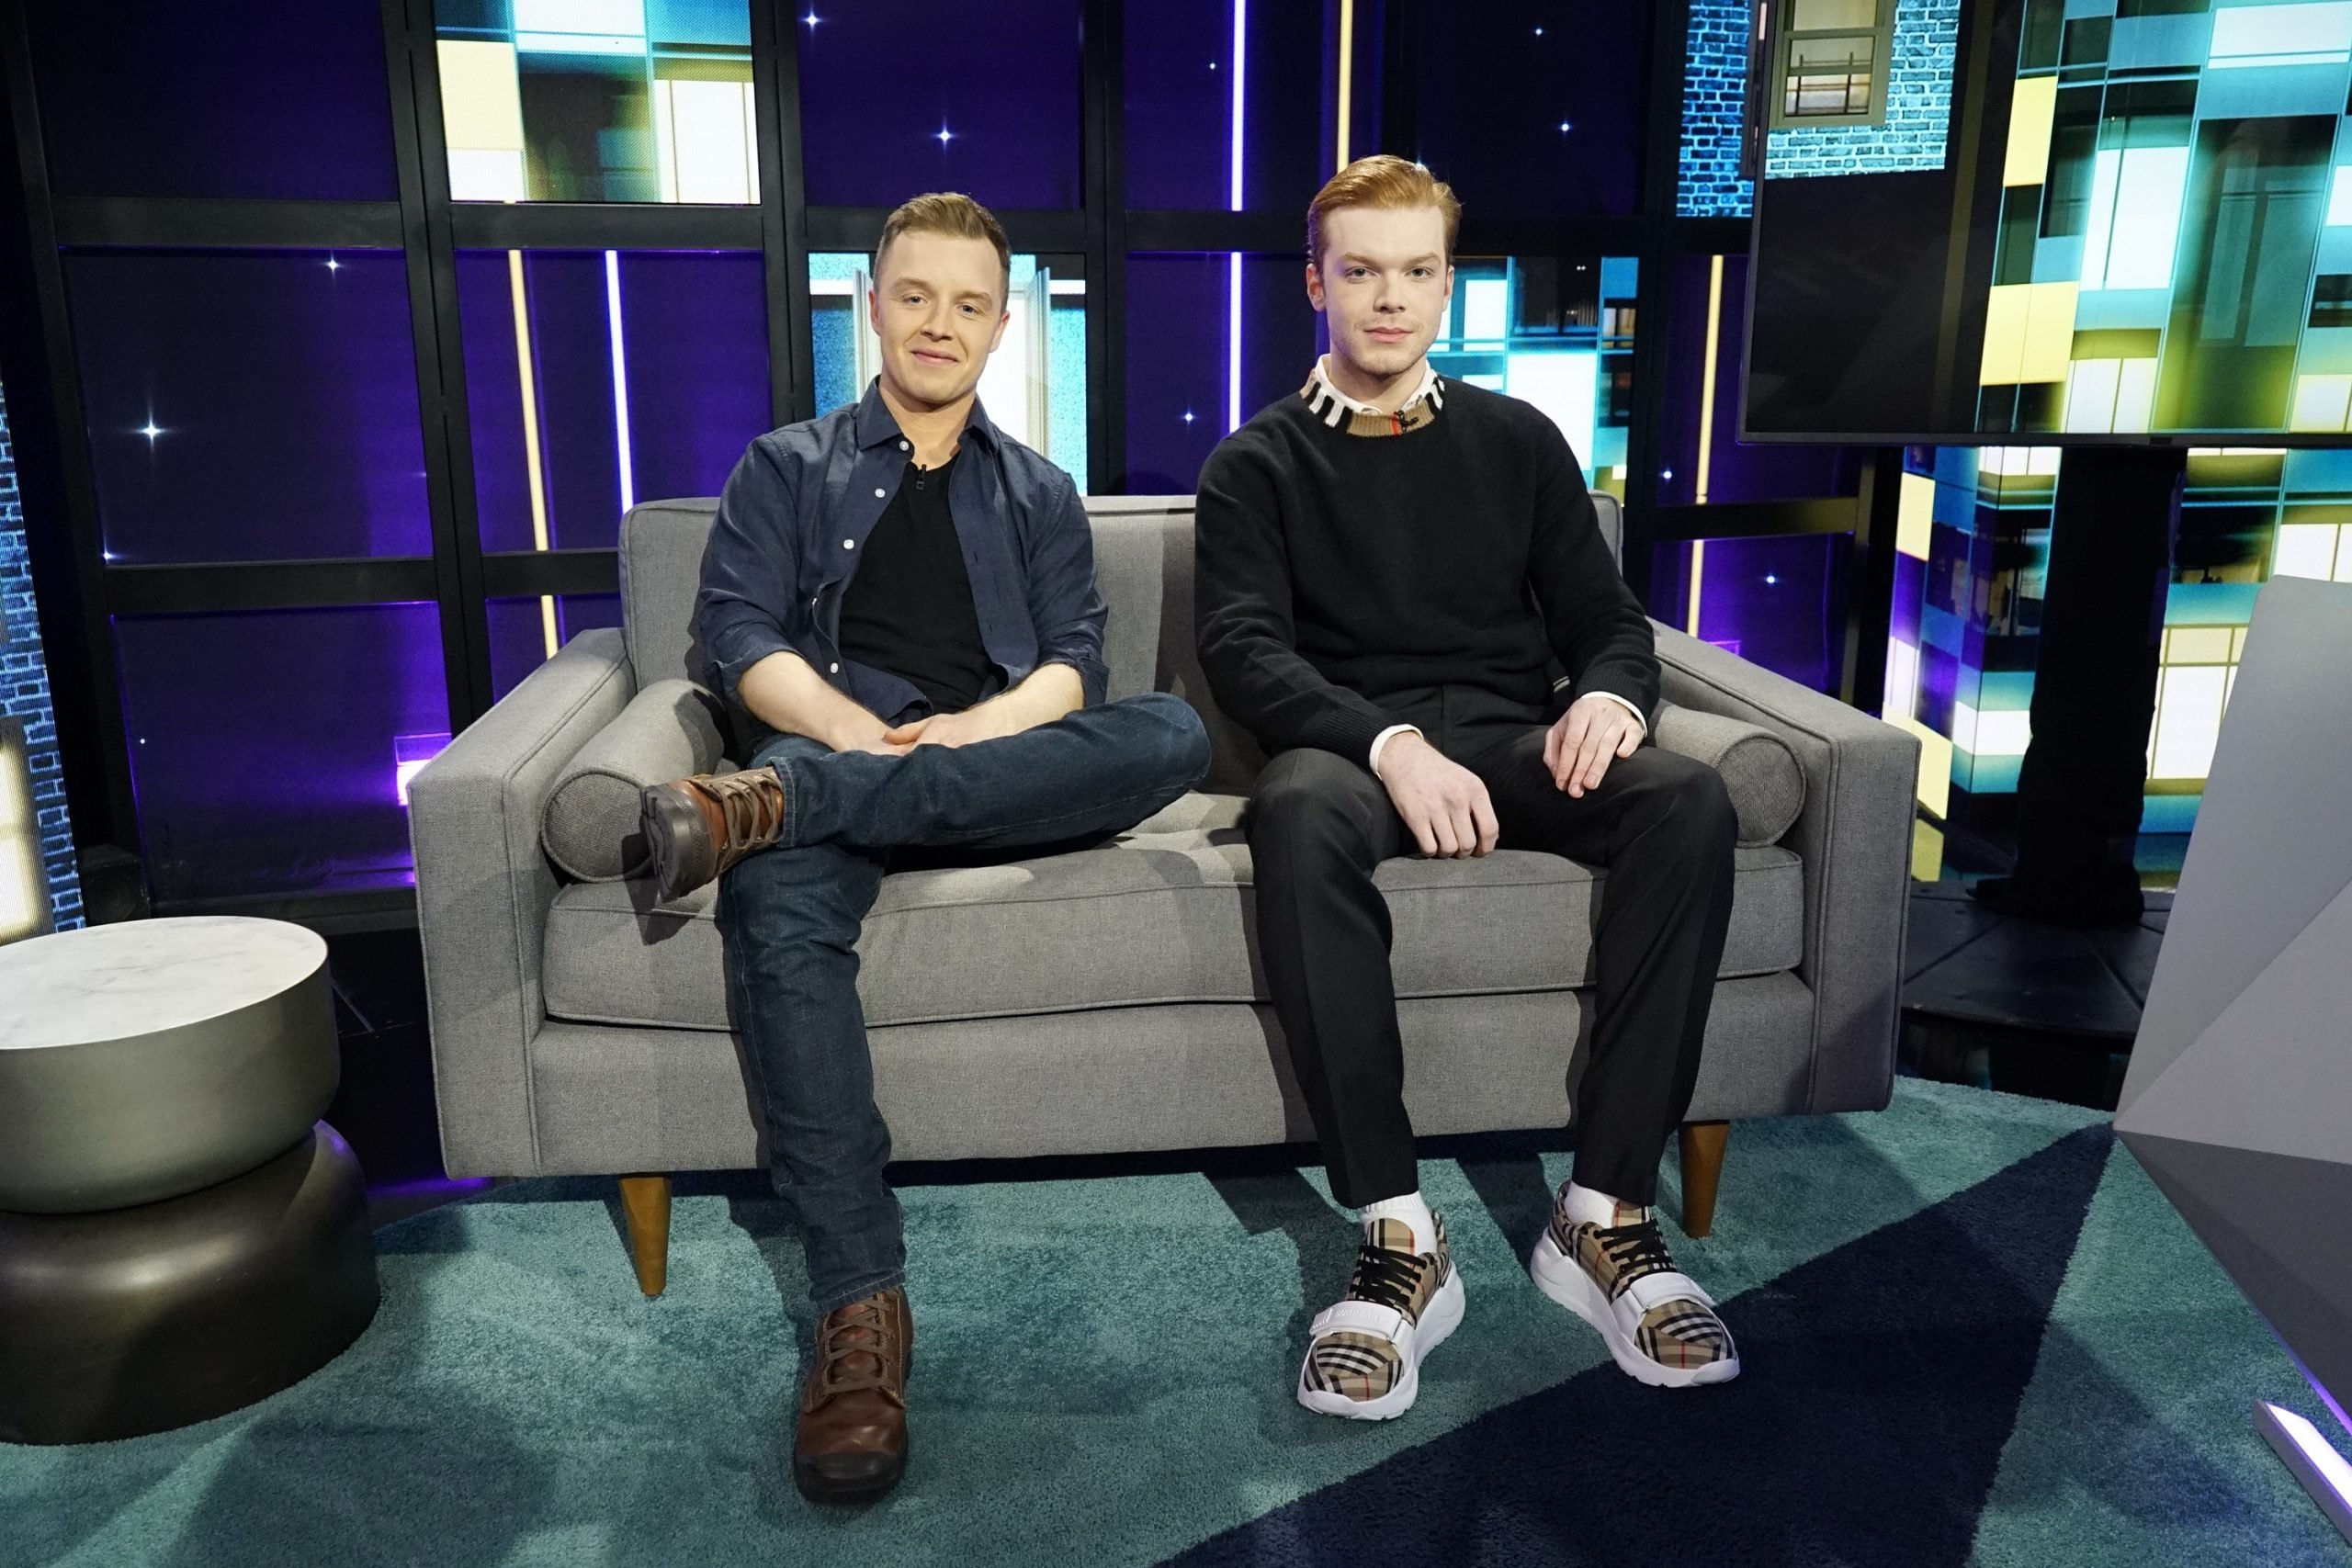 ‘Shameless’ Co-Stars Ian and Mickey Never Dated in Real Life, but Cameron Monaghan Did Date 1 Co-Star Off-Screen